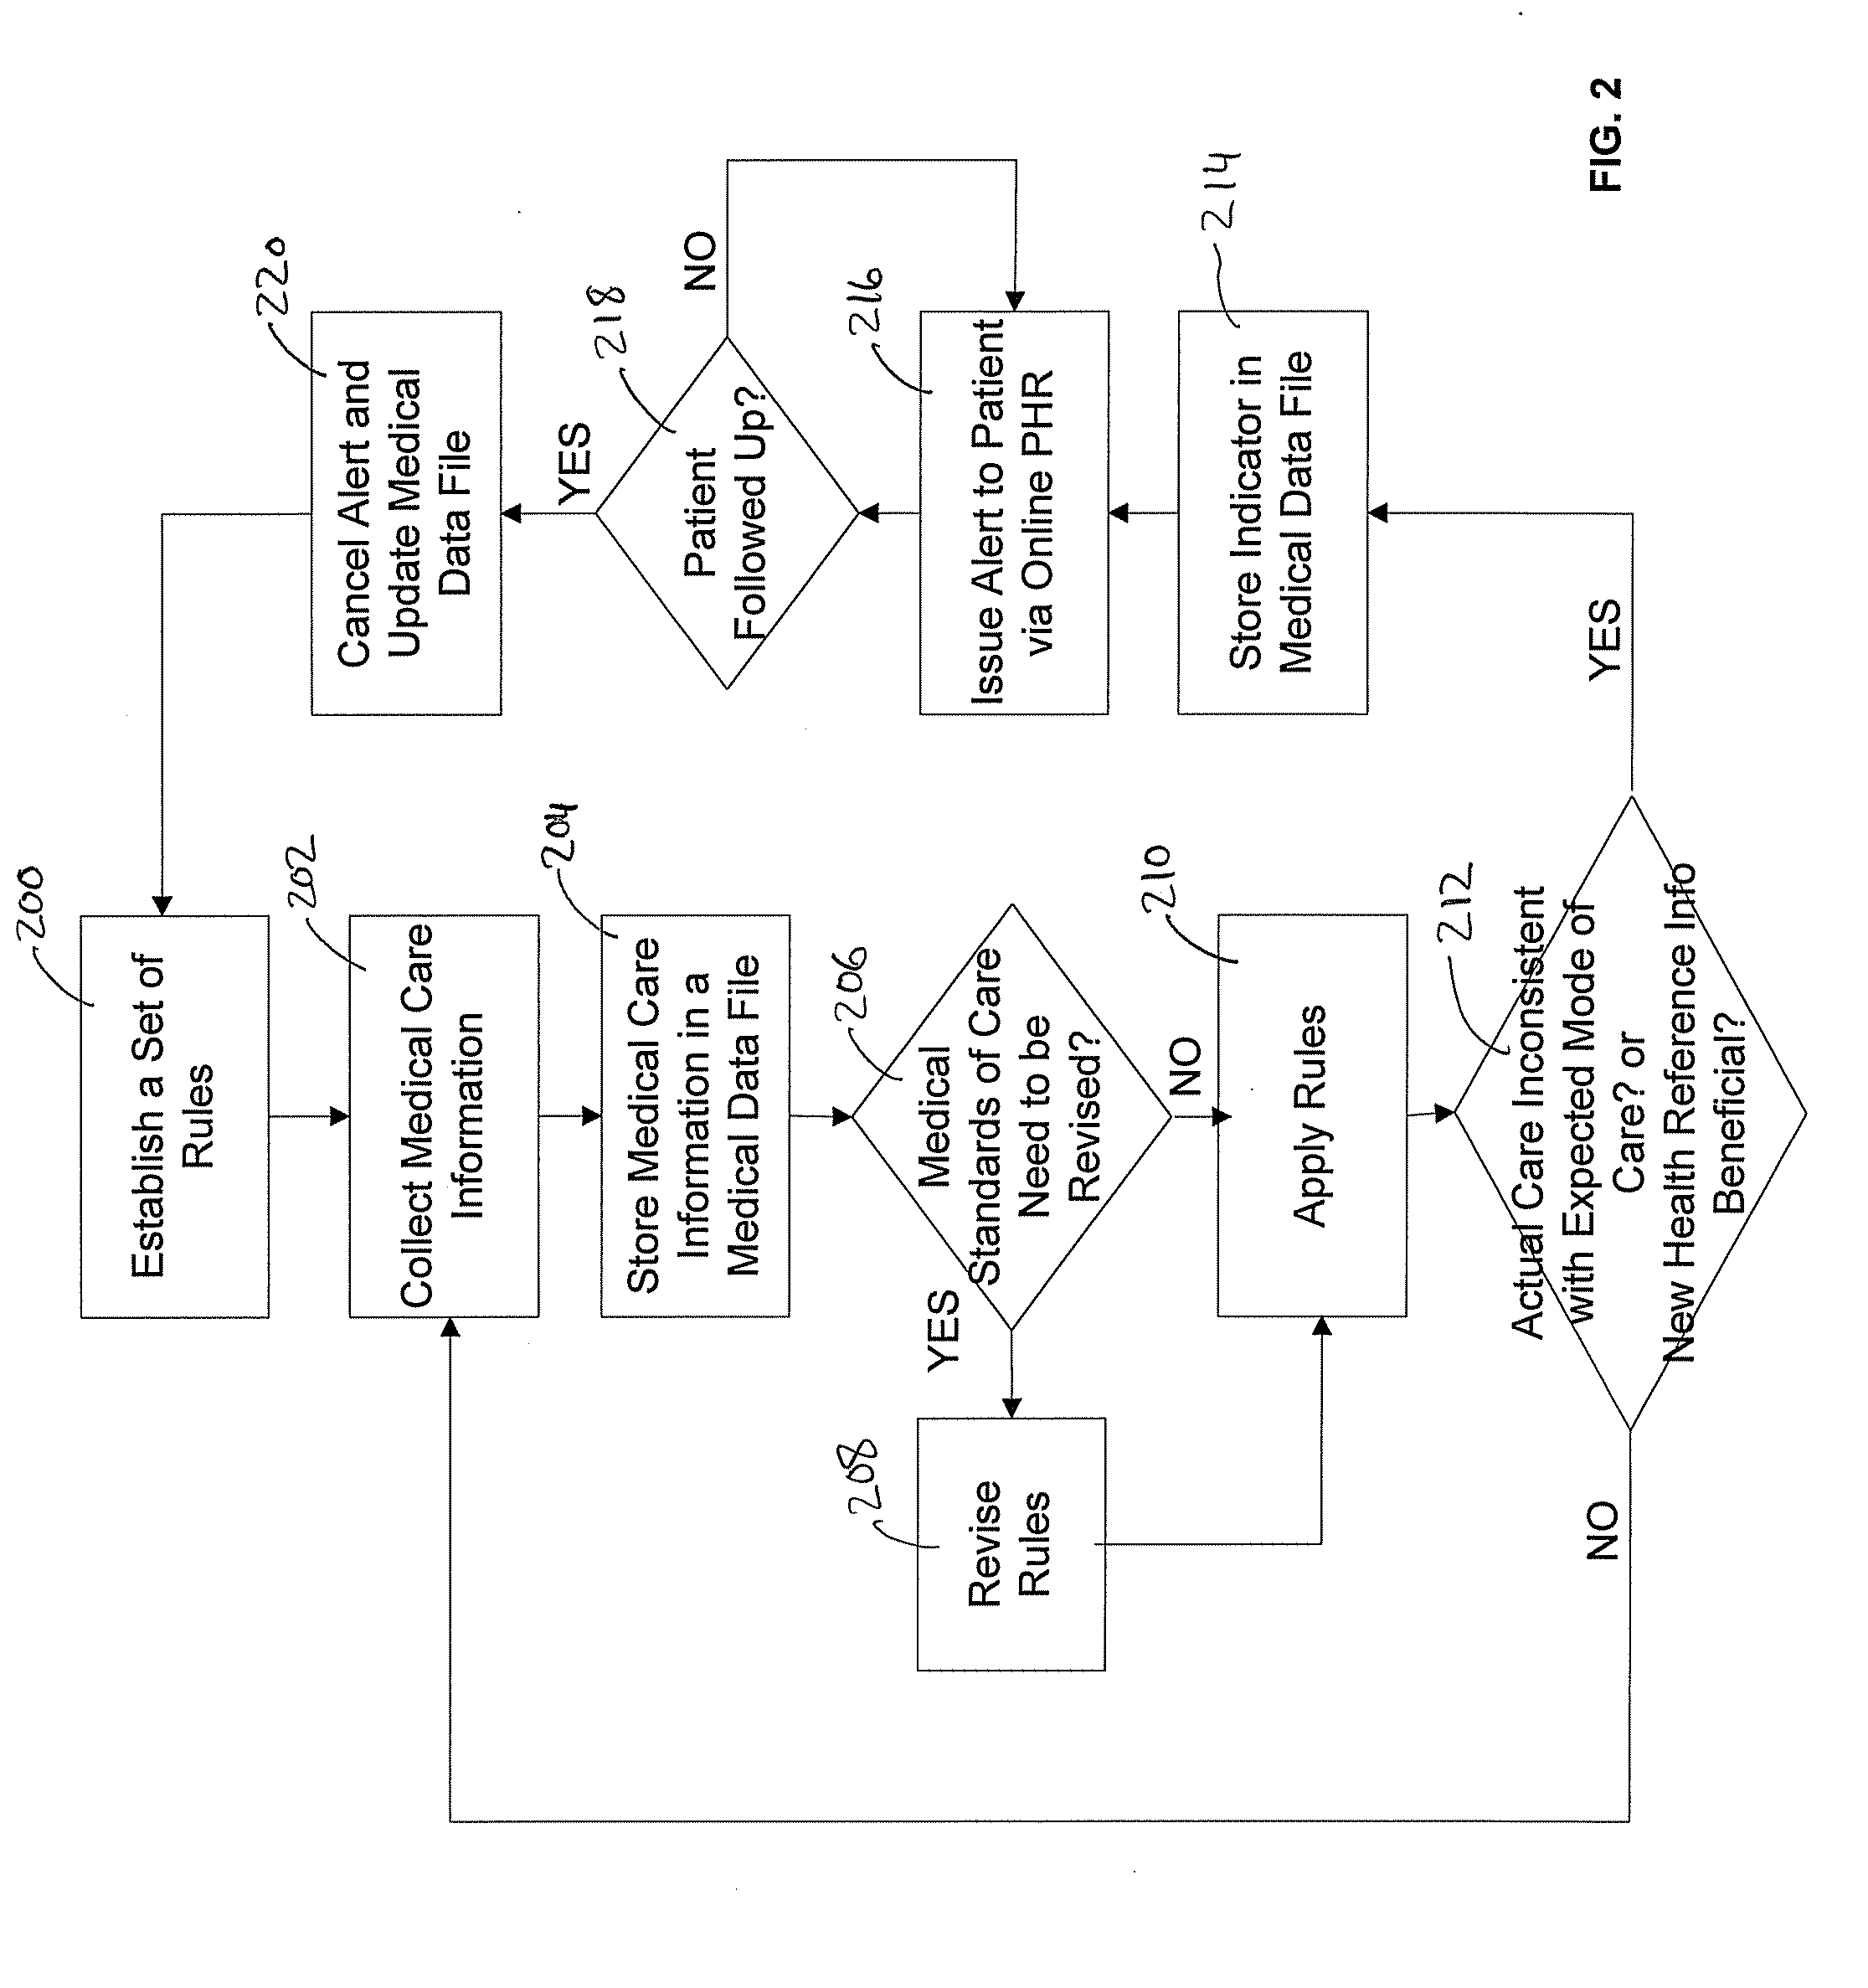 System and method for communicating health care alerts via an interactive personal health record